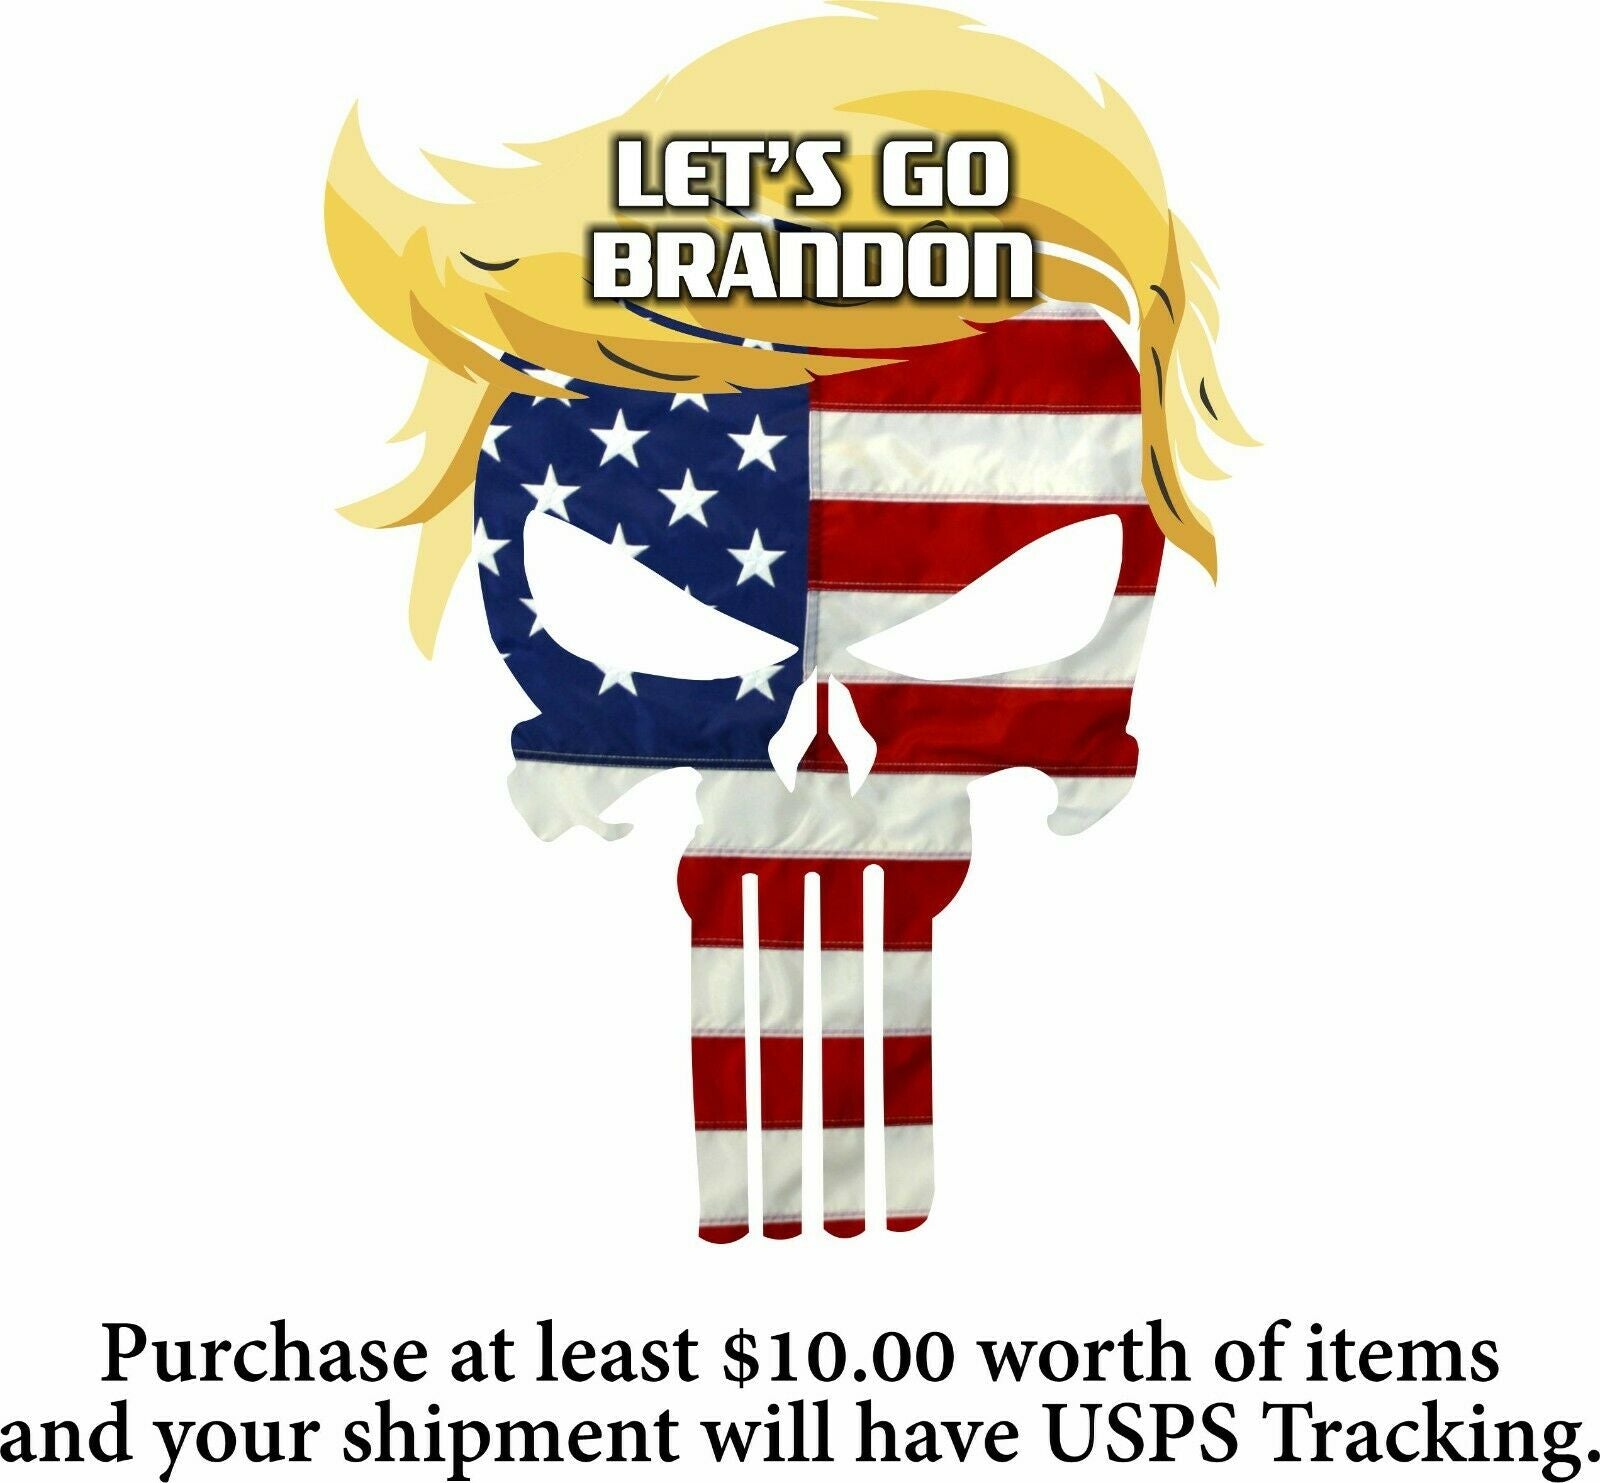 Distressed Flag Let's Go Brandon Decal Bumper Sticker Made in the